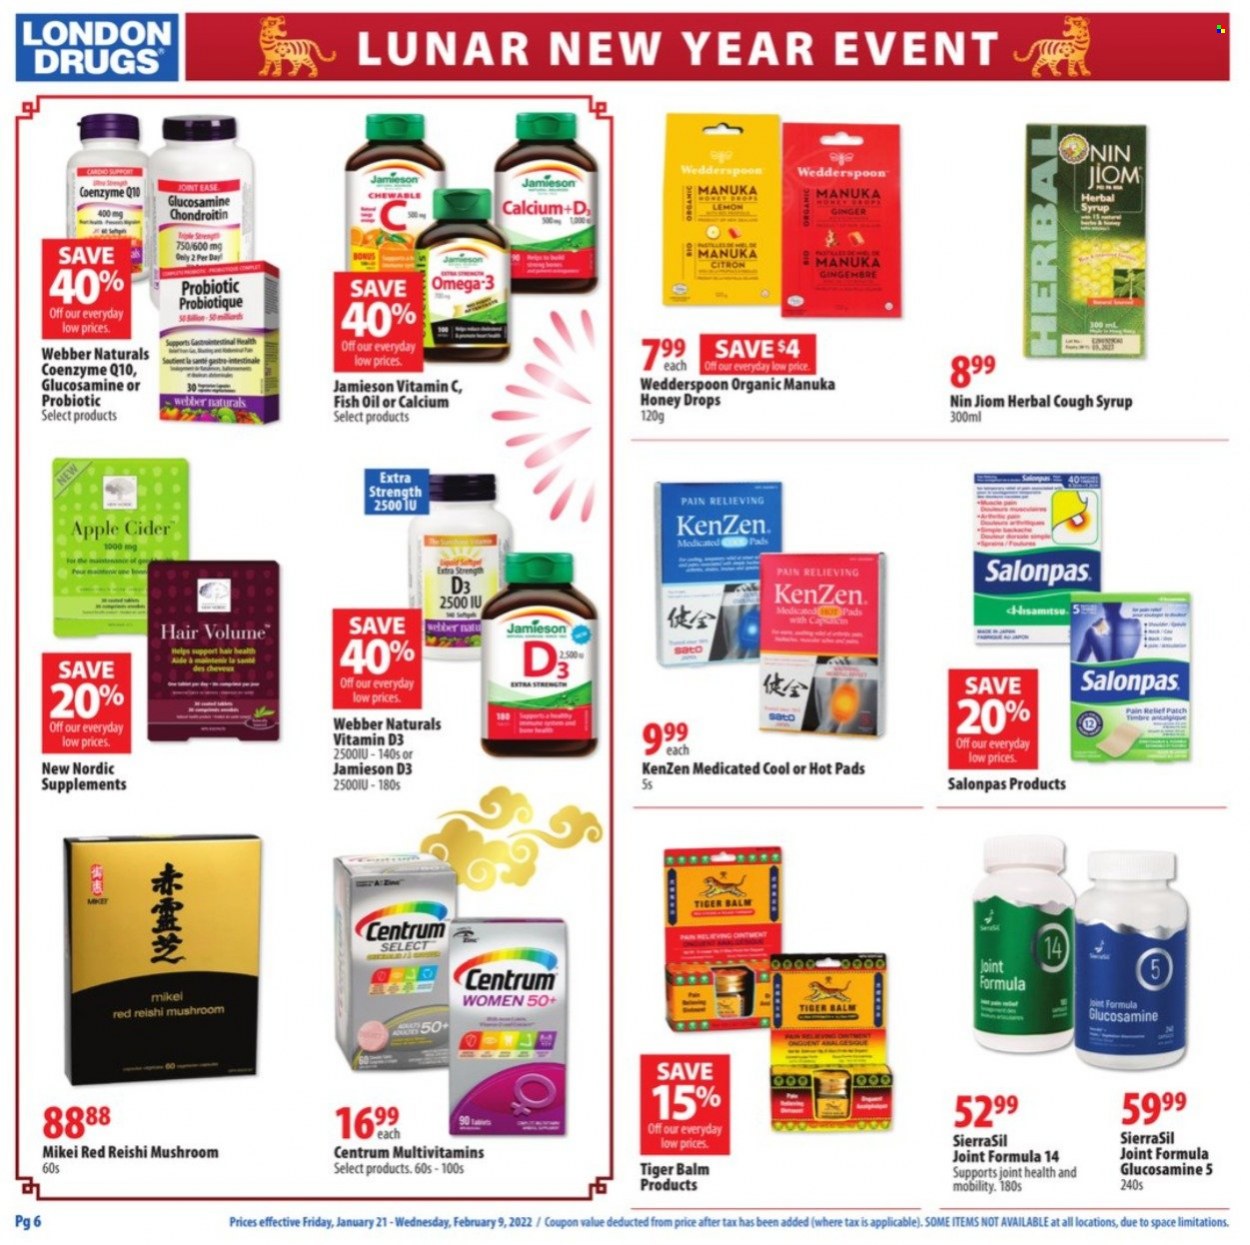 thumbnail - London Drugs Flyer - January 21, 2022 - February 09, 2022 - Sales products - mushrooms, ginger, syrup, Manuka Honey, apple cider, cider, pain relief, fish oil, glucosamine, multivitamin, vitamin c, Omega-3, vitamin D3, Centrum, calcium. Page 6.